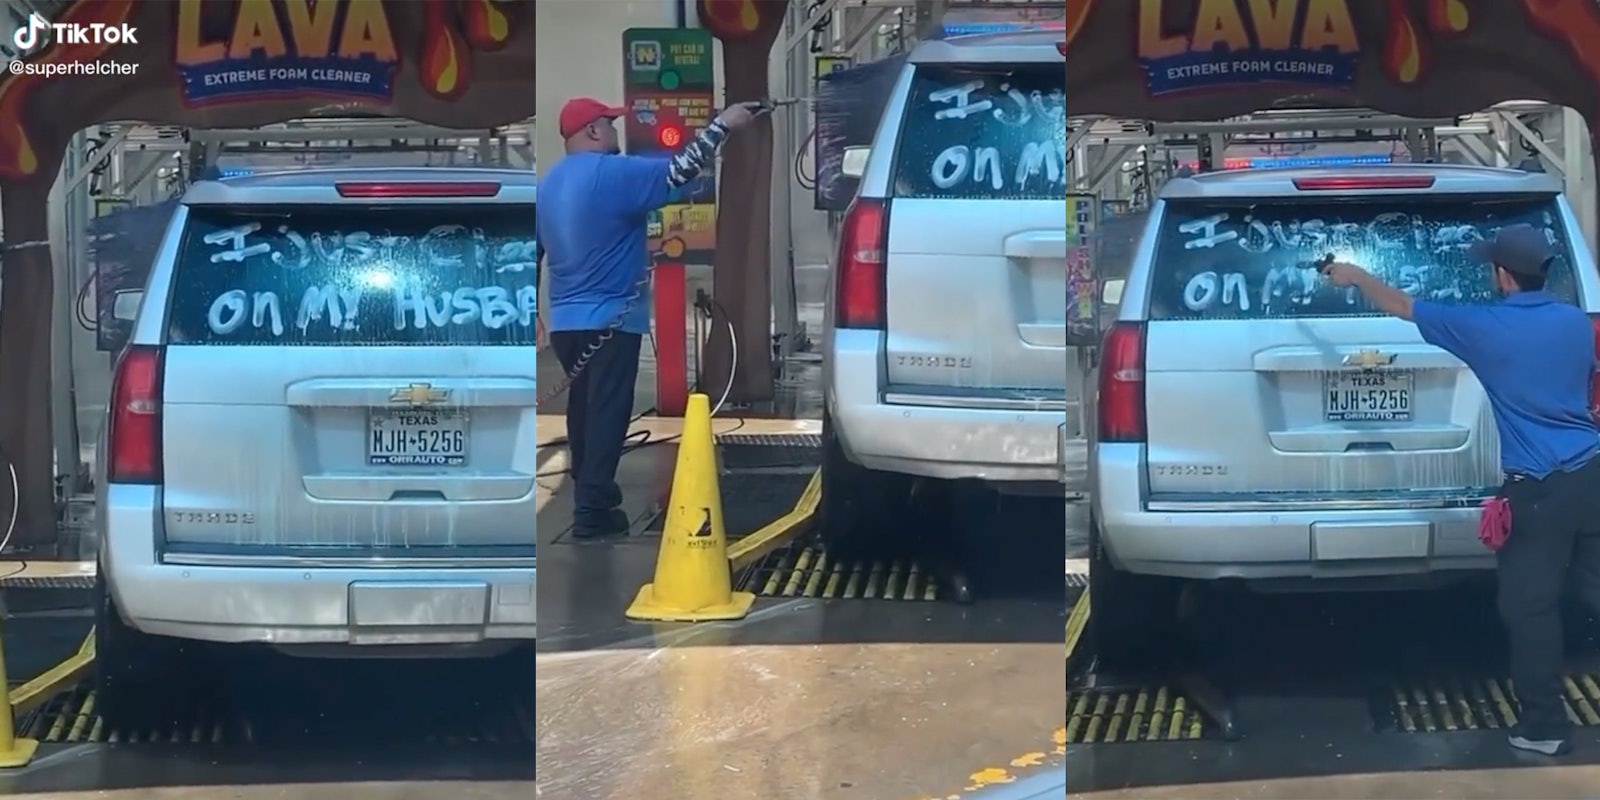 Car with 'I just cheated on my husband' message goes through car wash